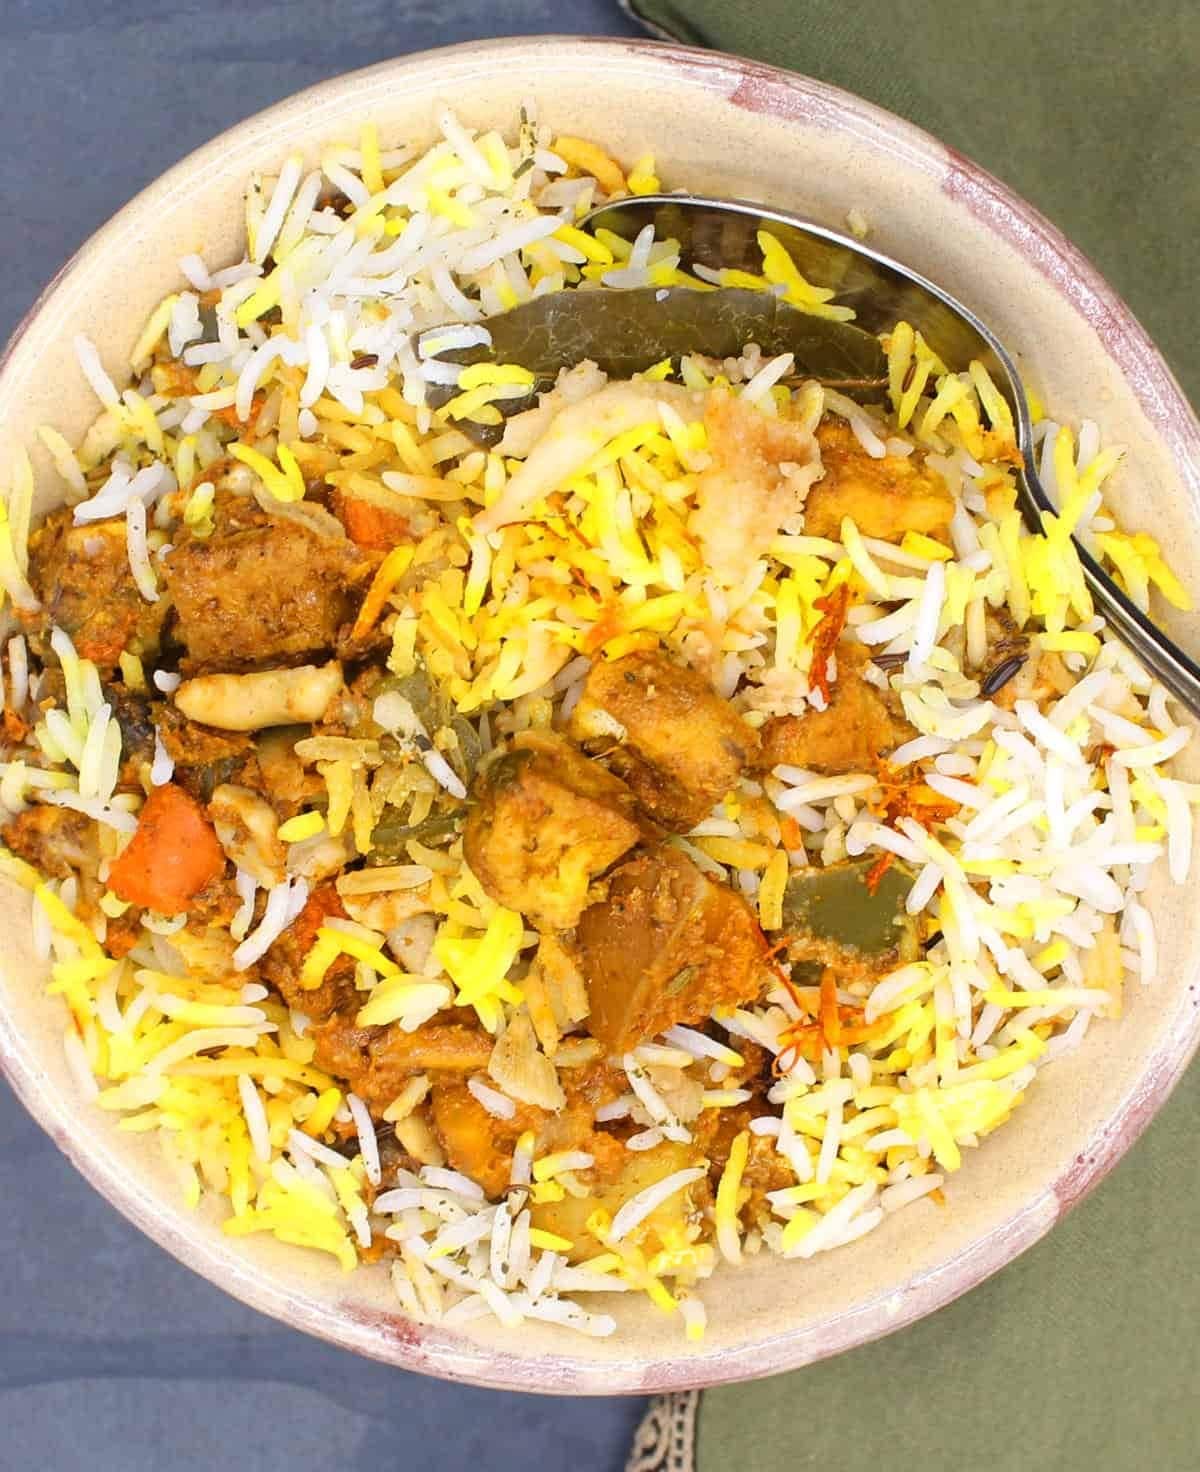 Vegetable biryani with layers of long-grain basmati rice and a rich masala sauce on a bowl. 